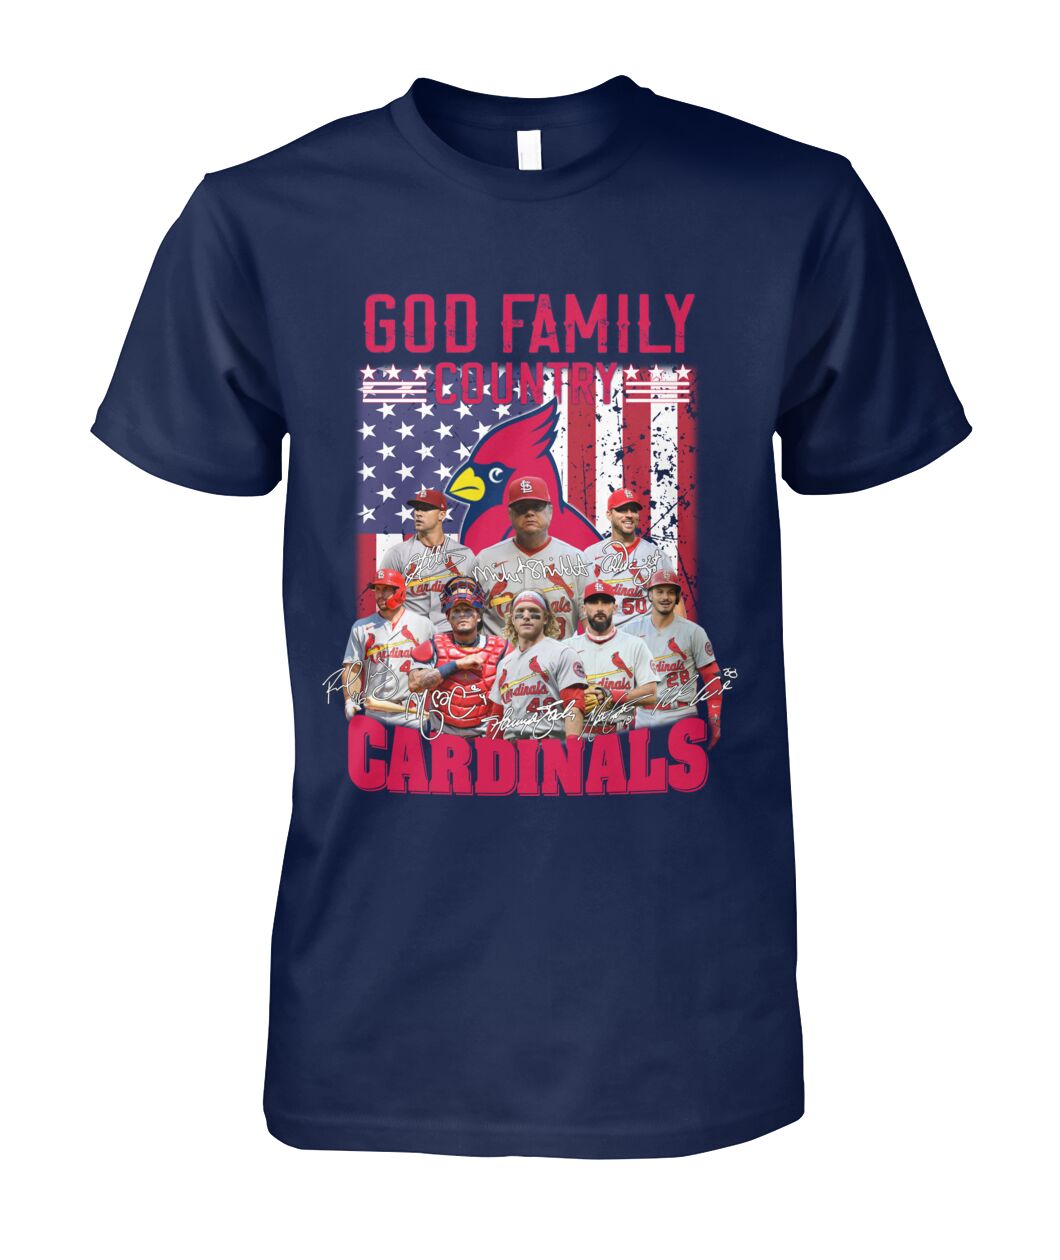 God family country St. Louis Cardinals American flag shirt, v-neck and hoodie